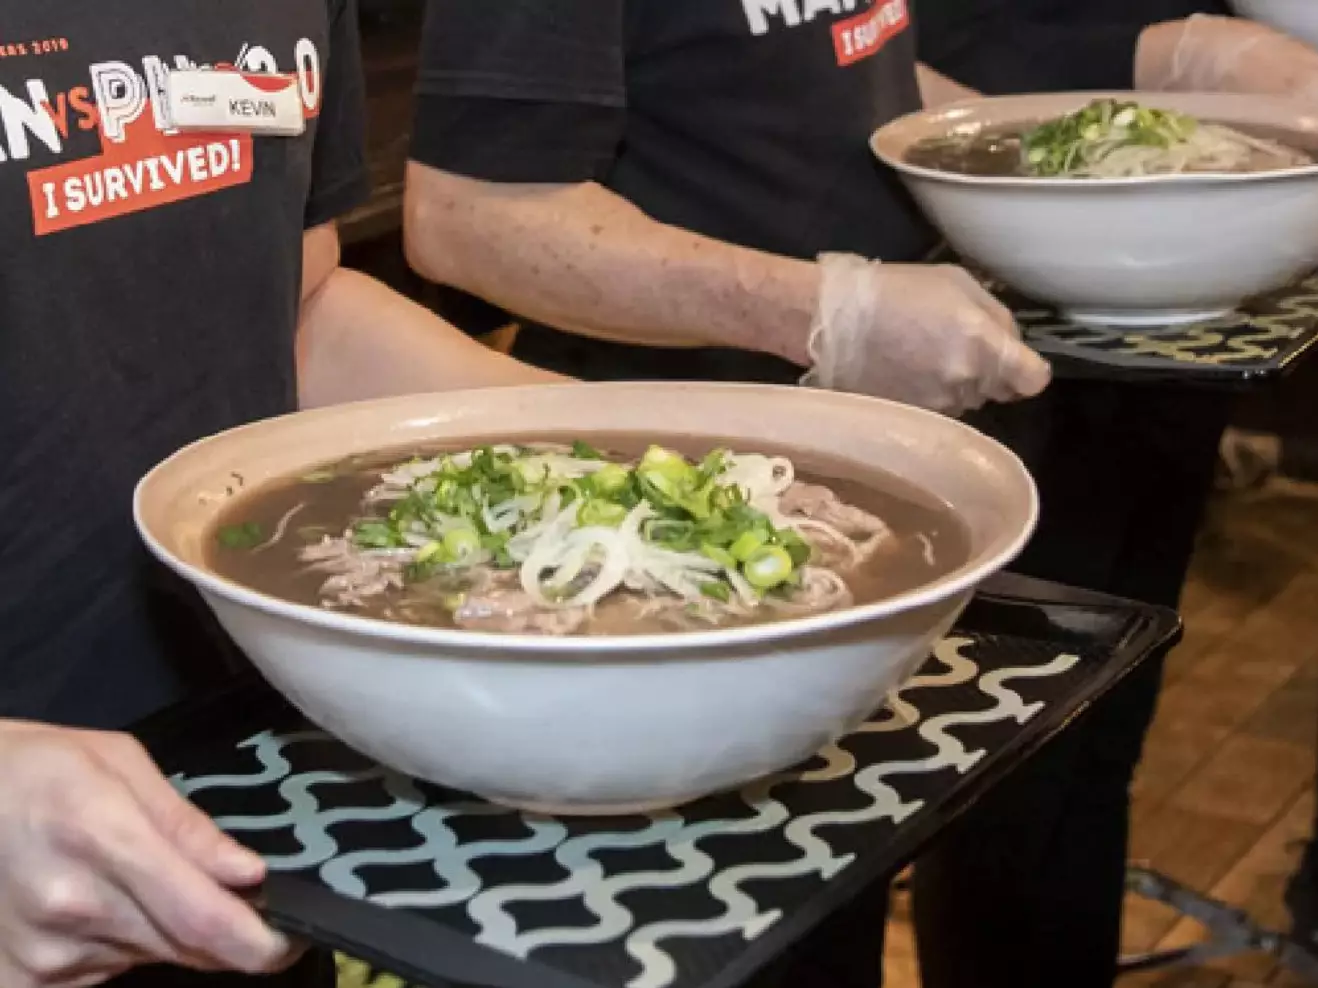 That's a lot of Pho.